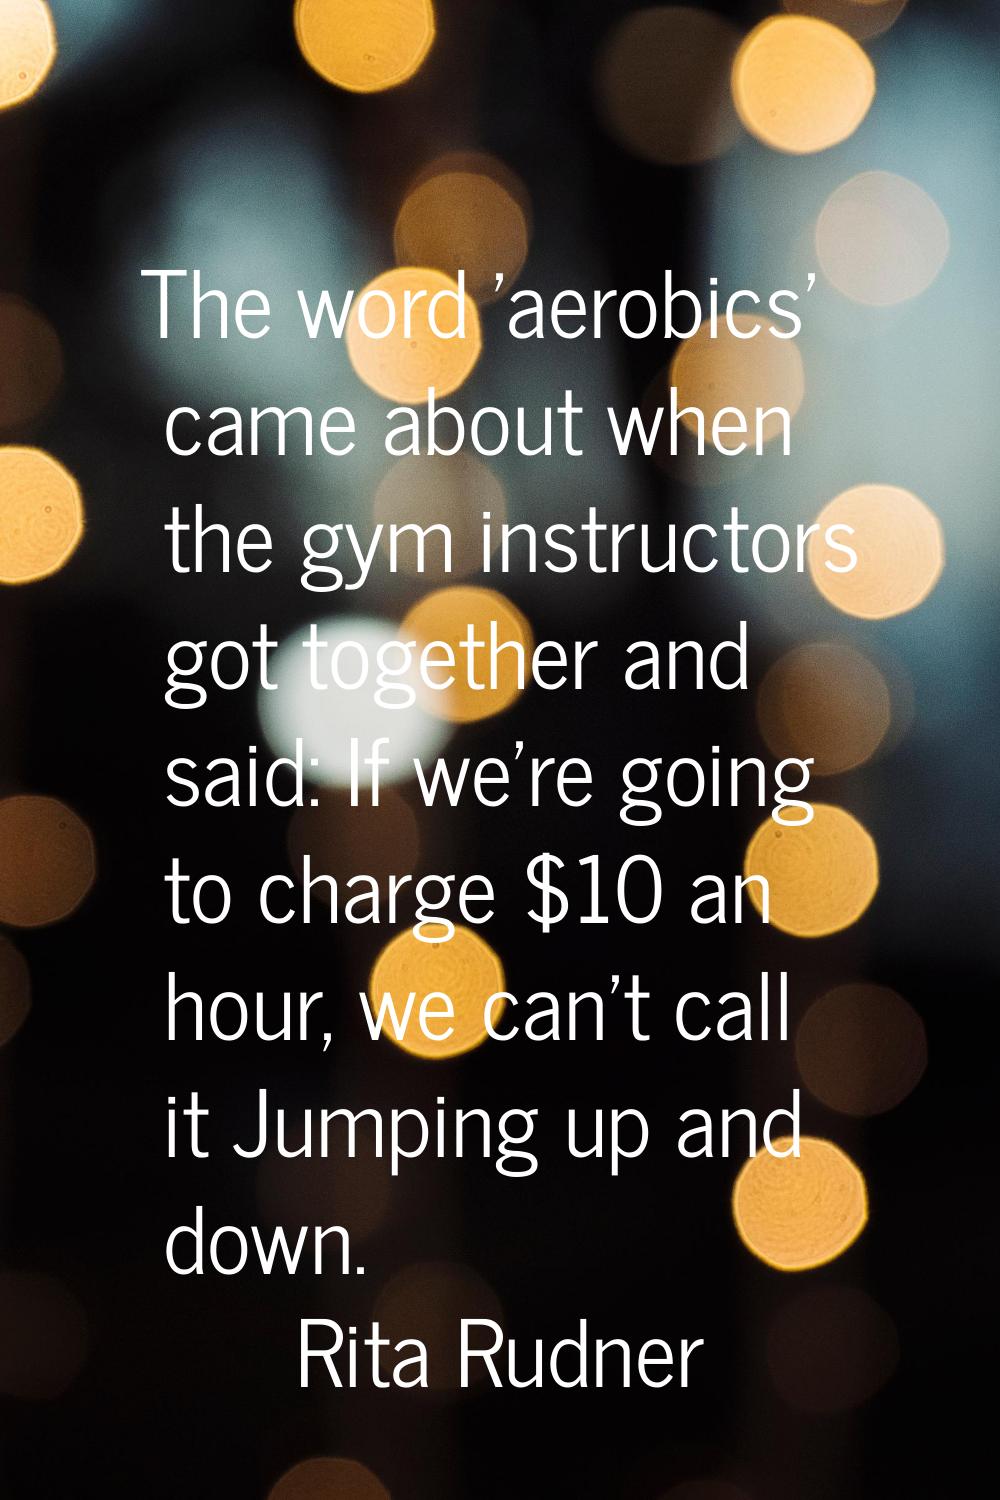 The word 'aerobics' came about when the gym instructors got together and said: If we're going to ch